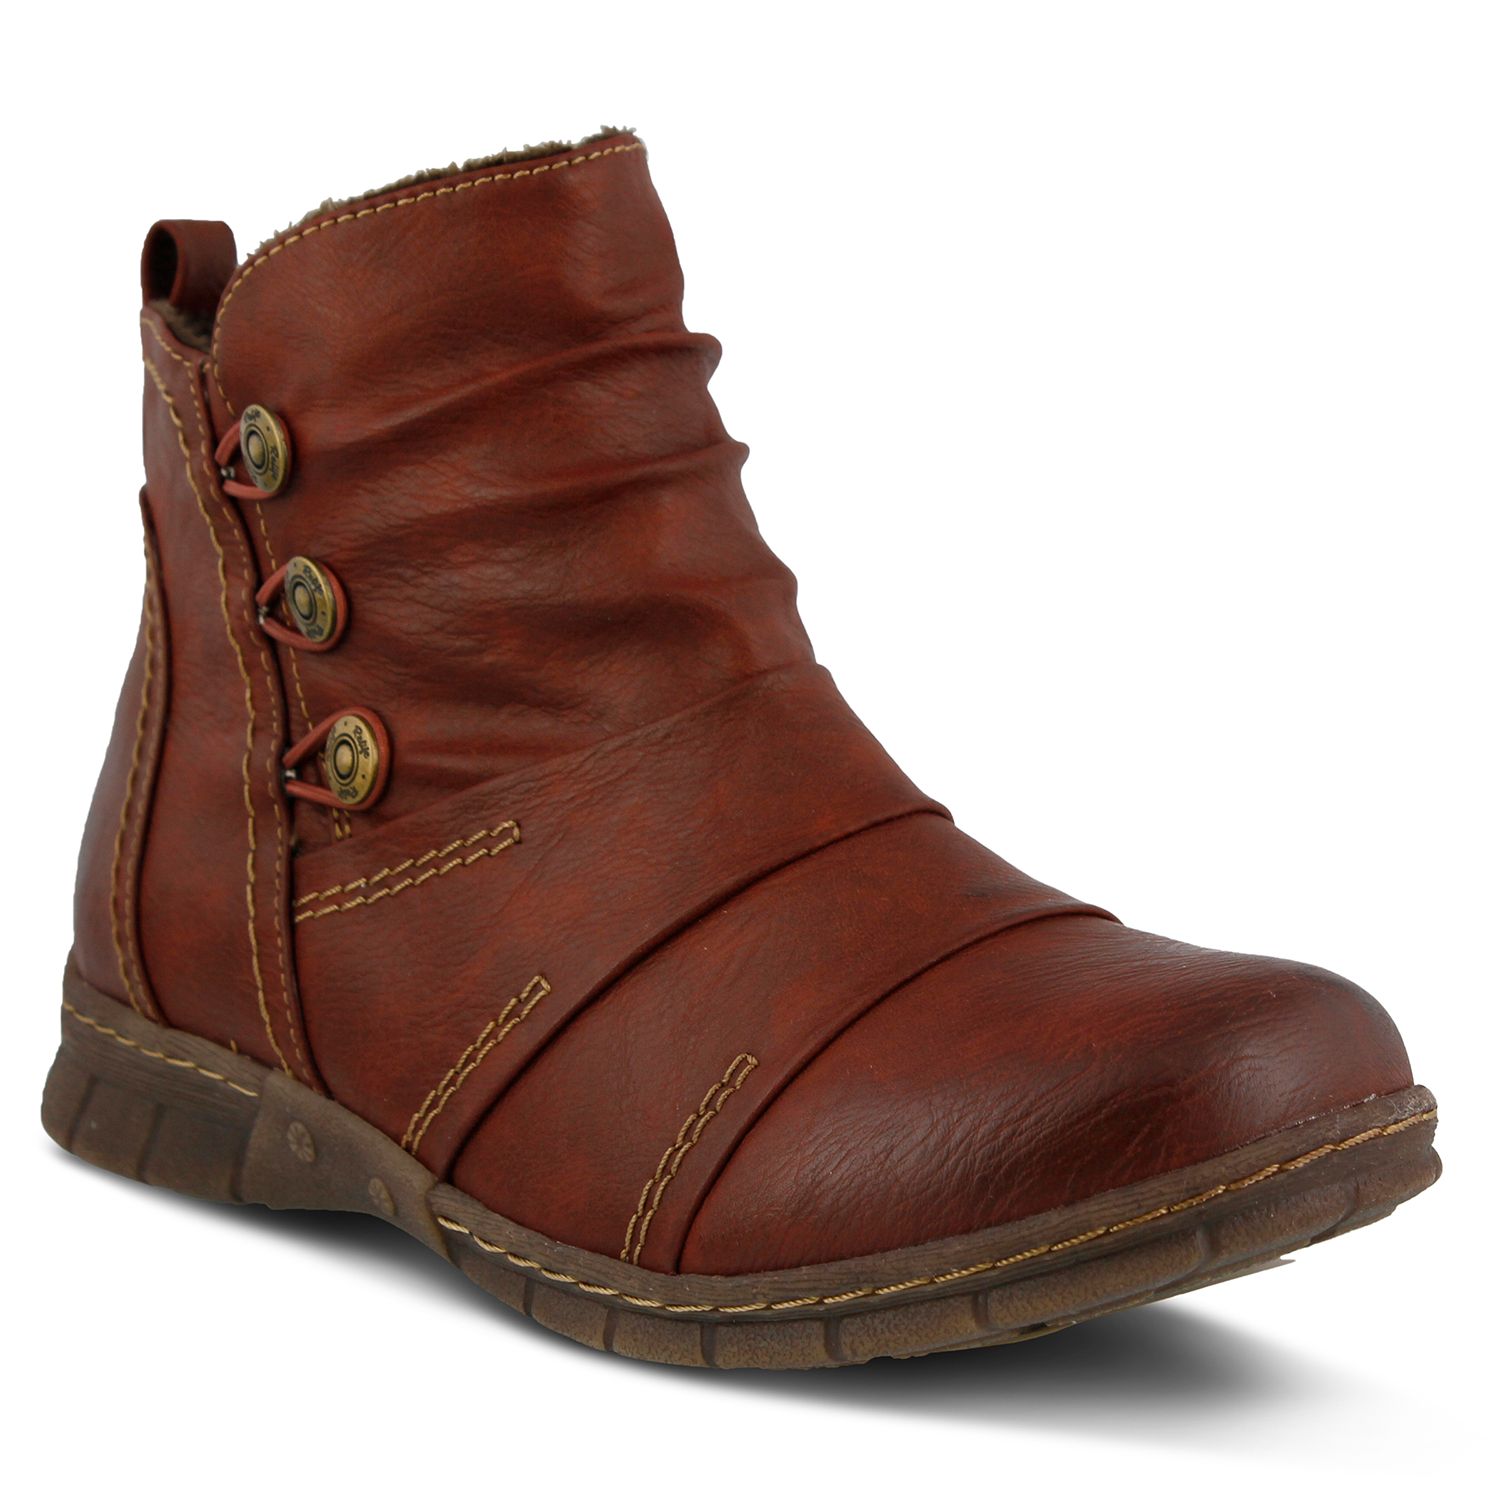 women's water resistant ankle boots